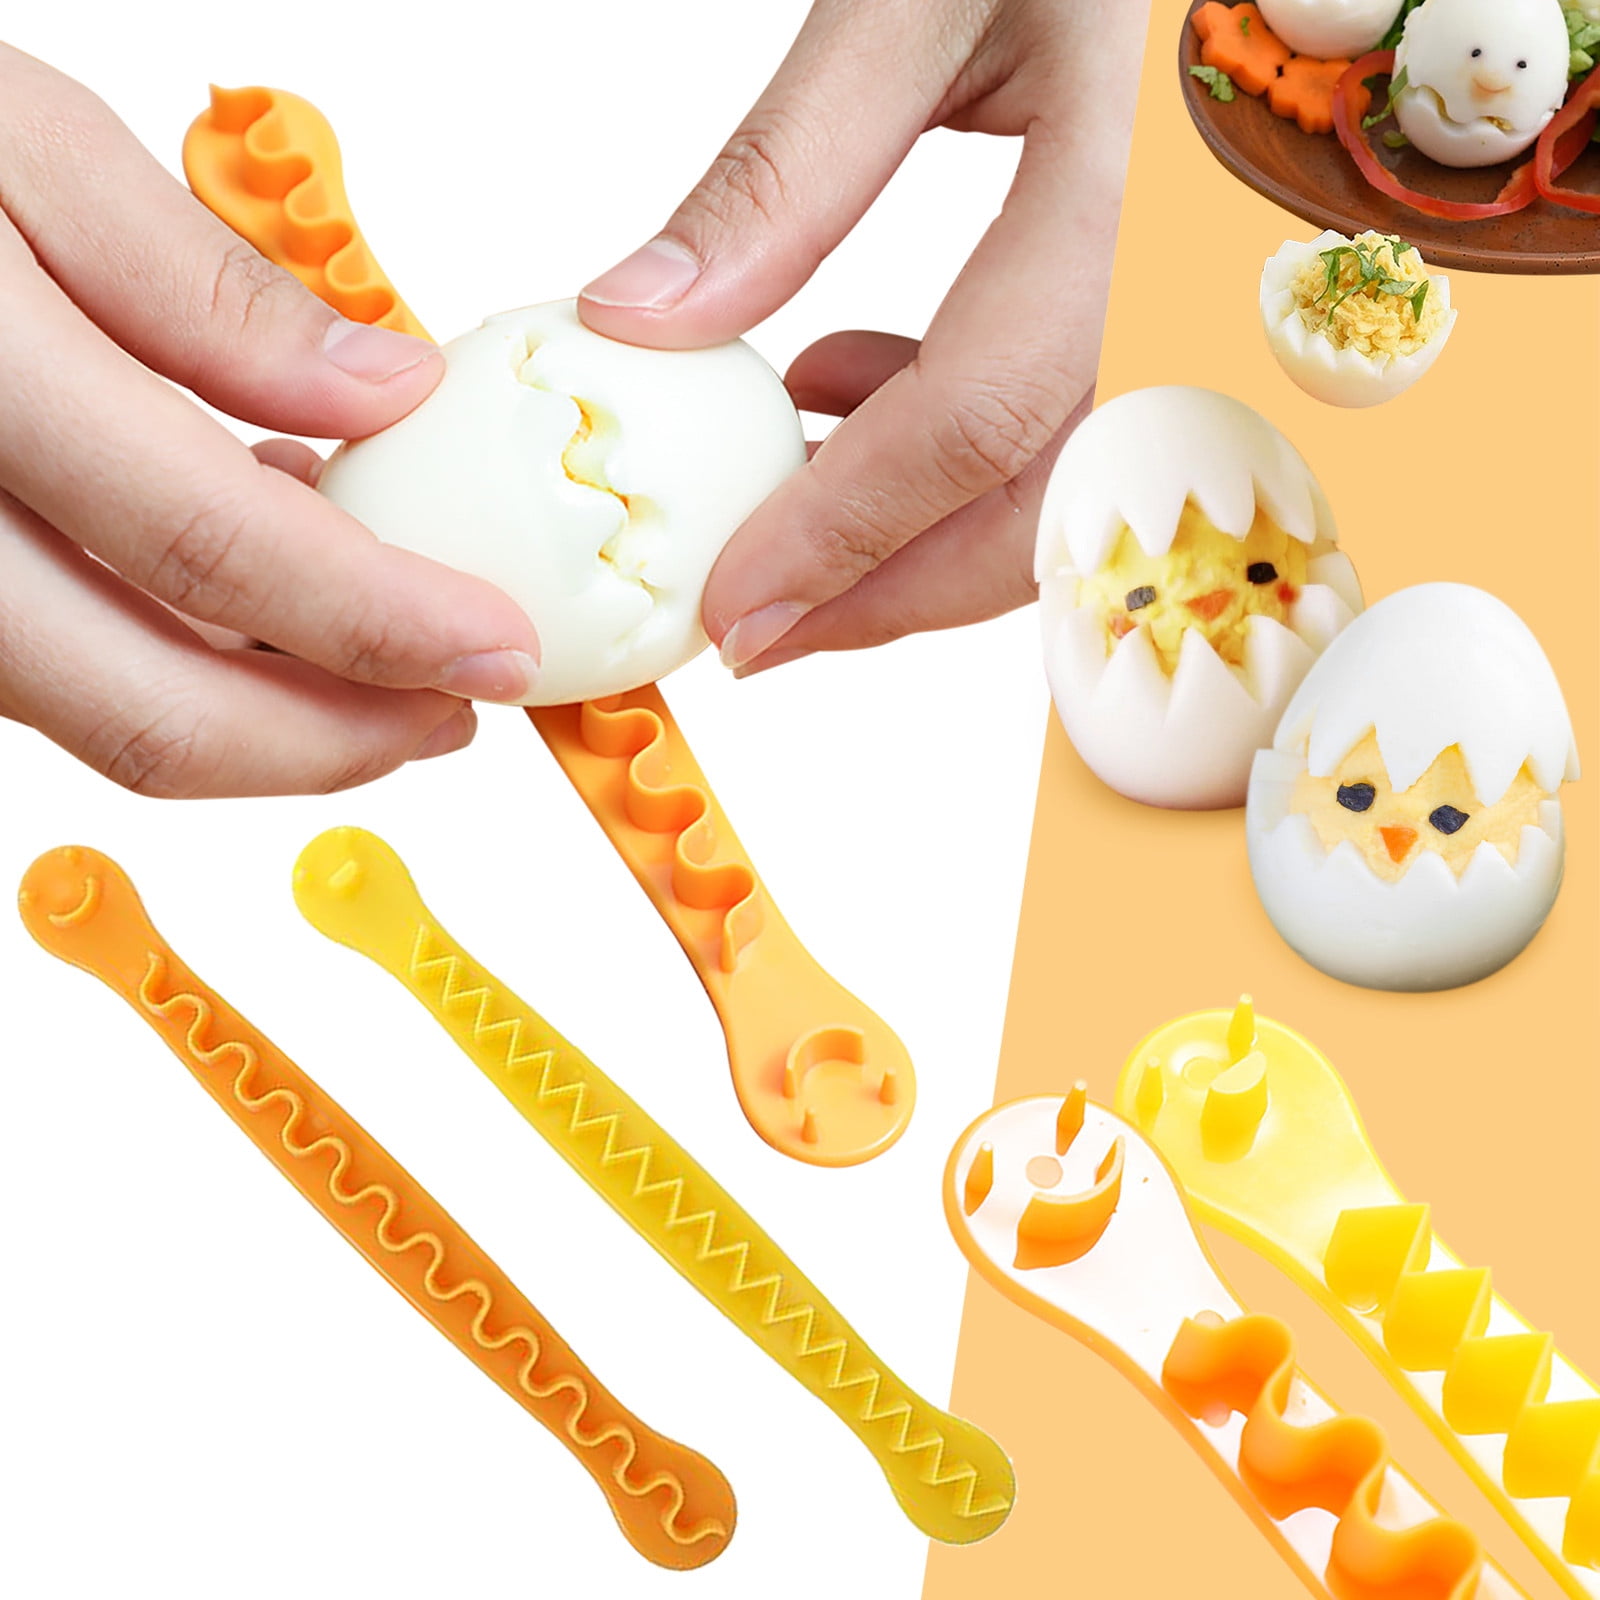 Flower Type Egg Cutting Gadget 2PCS, Yellow & Orange DIY Mold for Kitchen Cooking Tool DRADUO Lace Cutting Wires Egg Cutter 